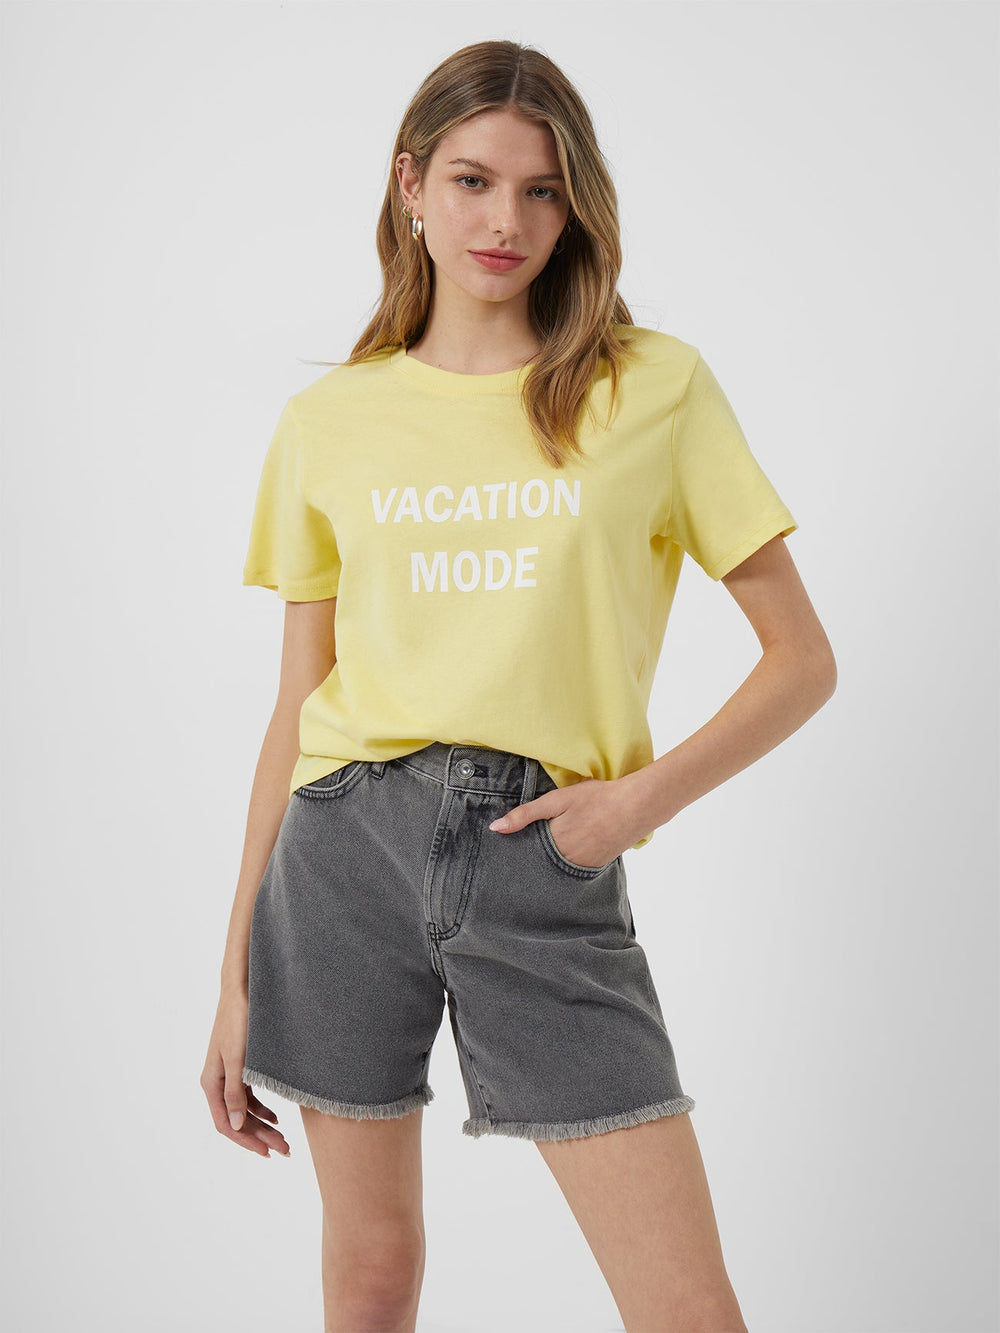 Vacation Mode T-Shirt | French Connection UK